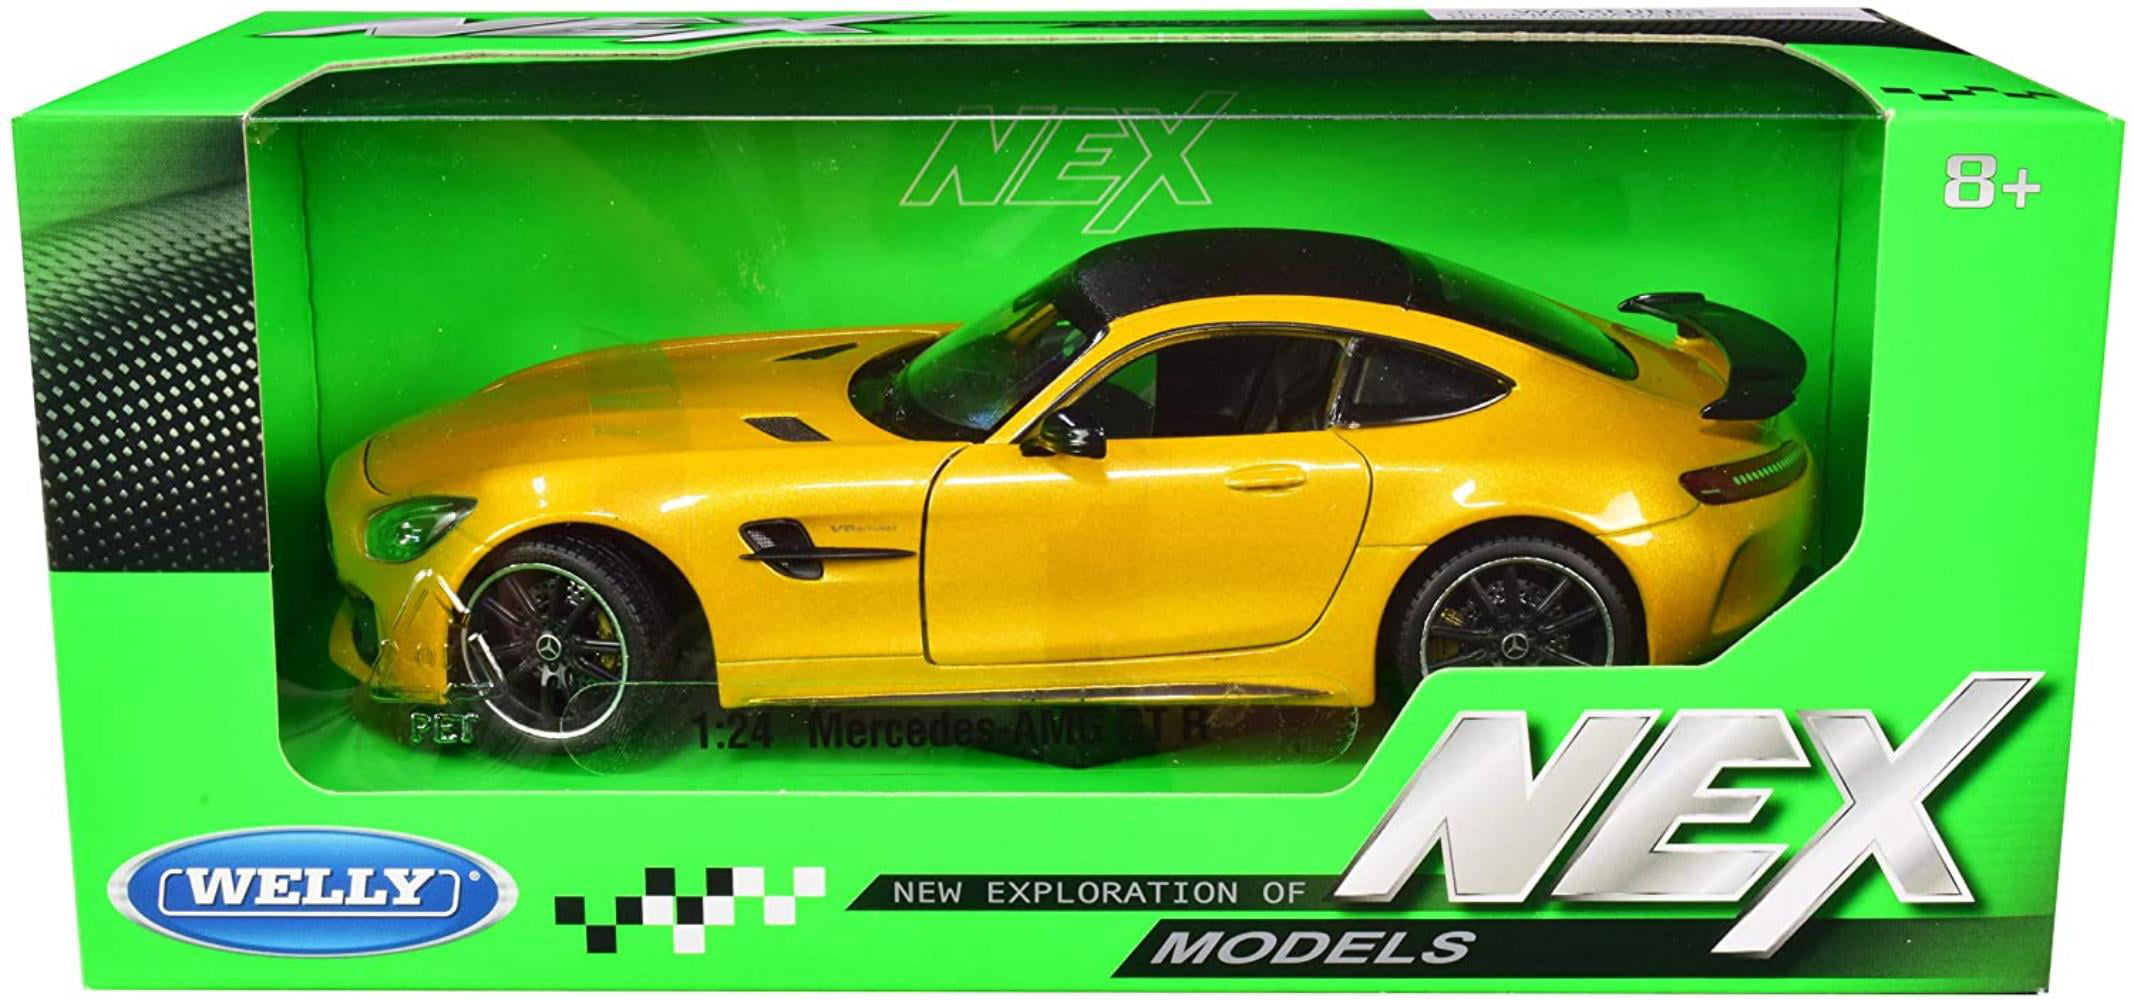 Mercedes AMG GT R Red with Carbon Top NEX Models 1/24 Diecast Model Car by Welly 24081